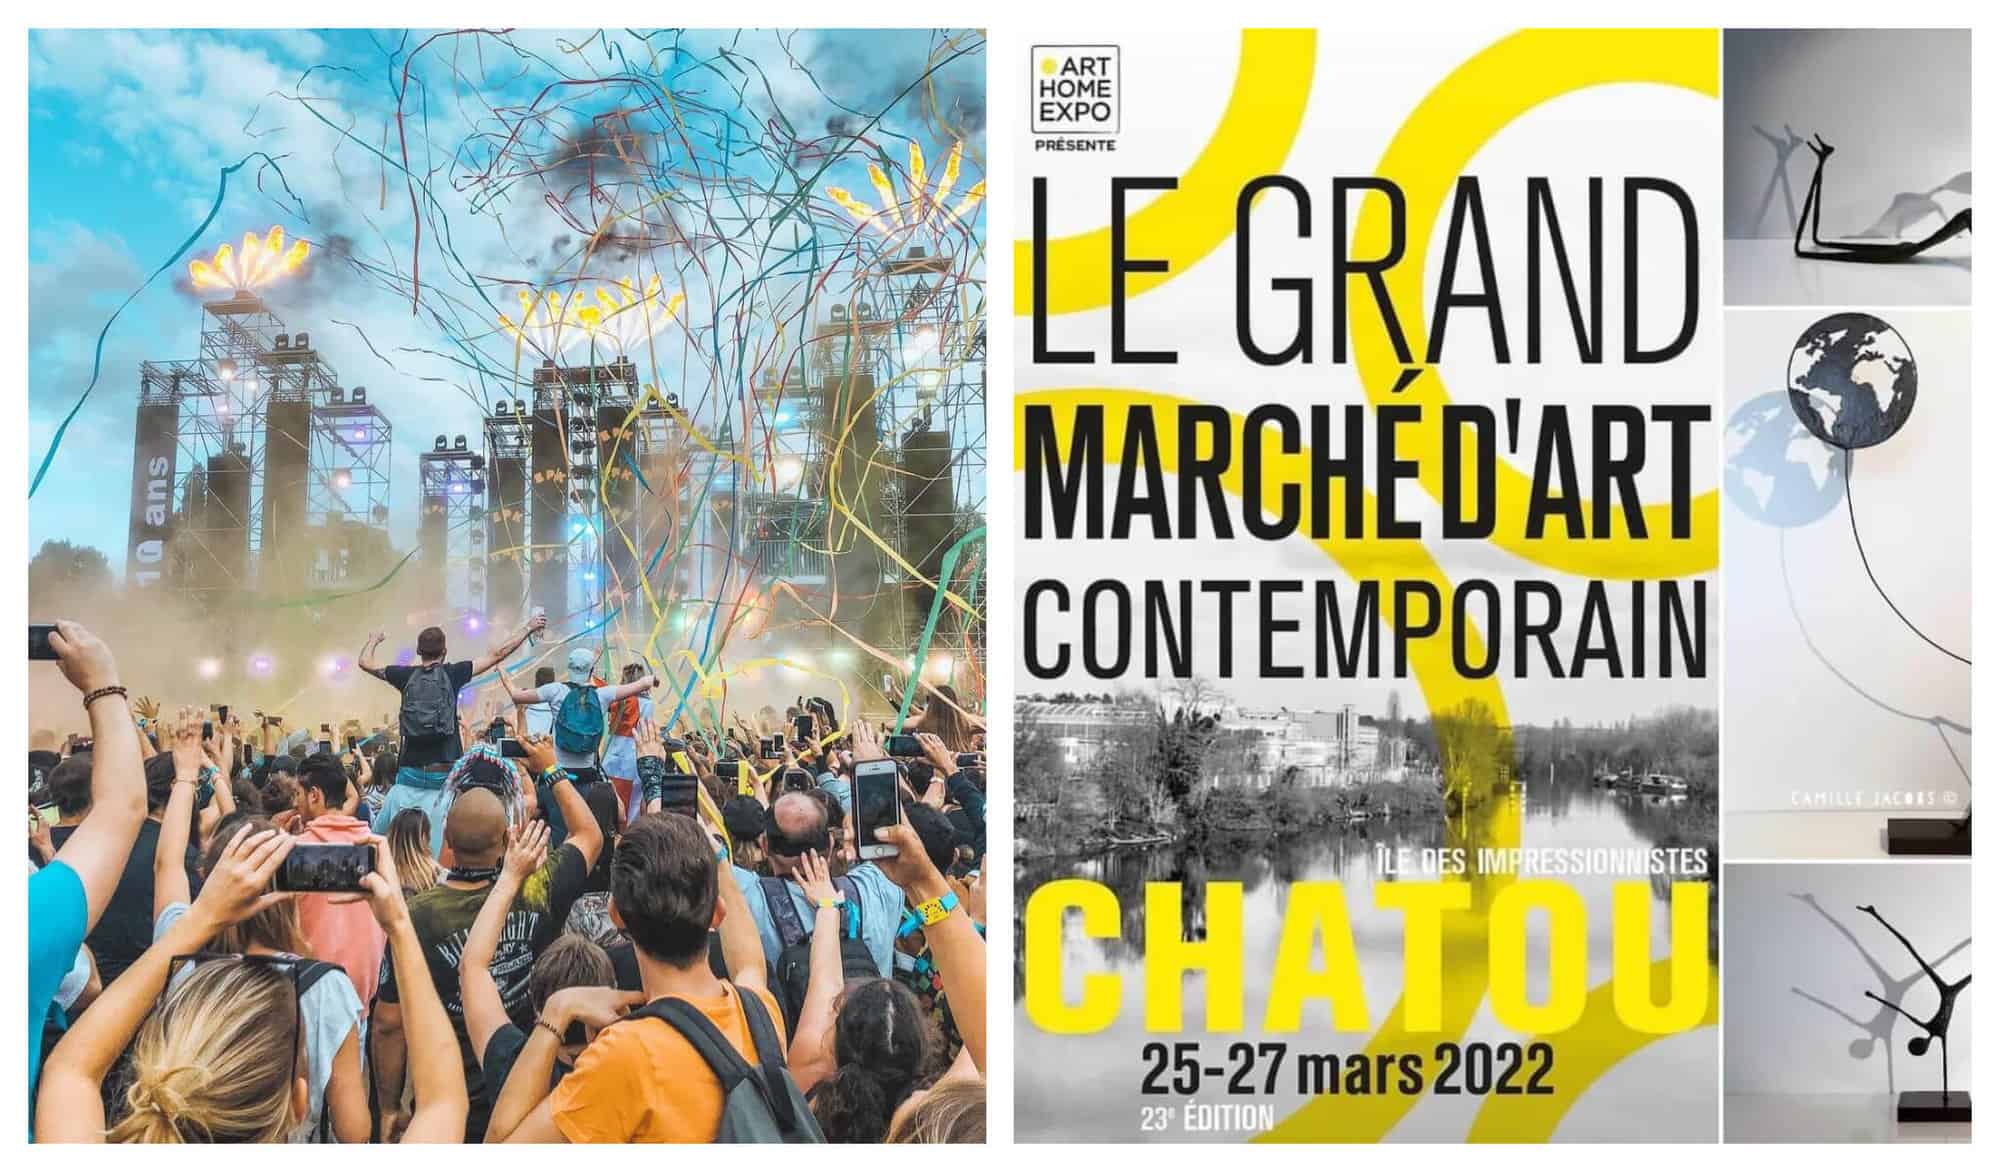 On the left is a crowd in a rave party with multicolored confetti and yellow fireworks. On the right is a black and white poster of the Seine river in gray and yellow texts.